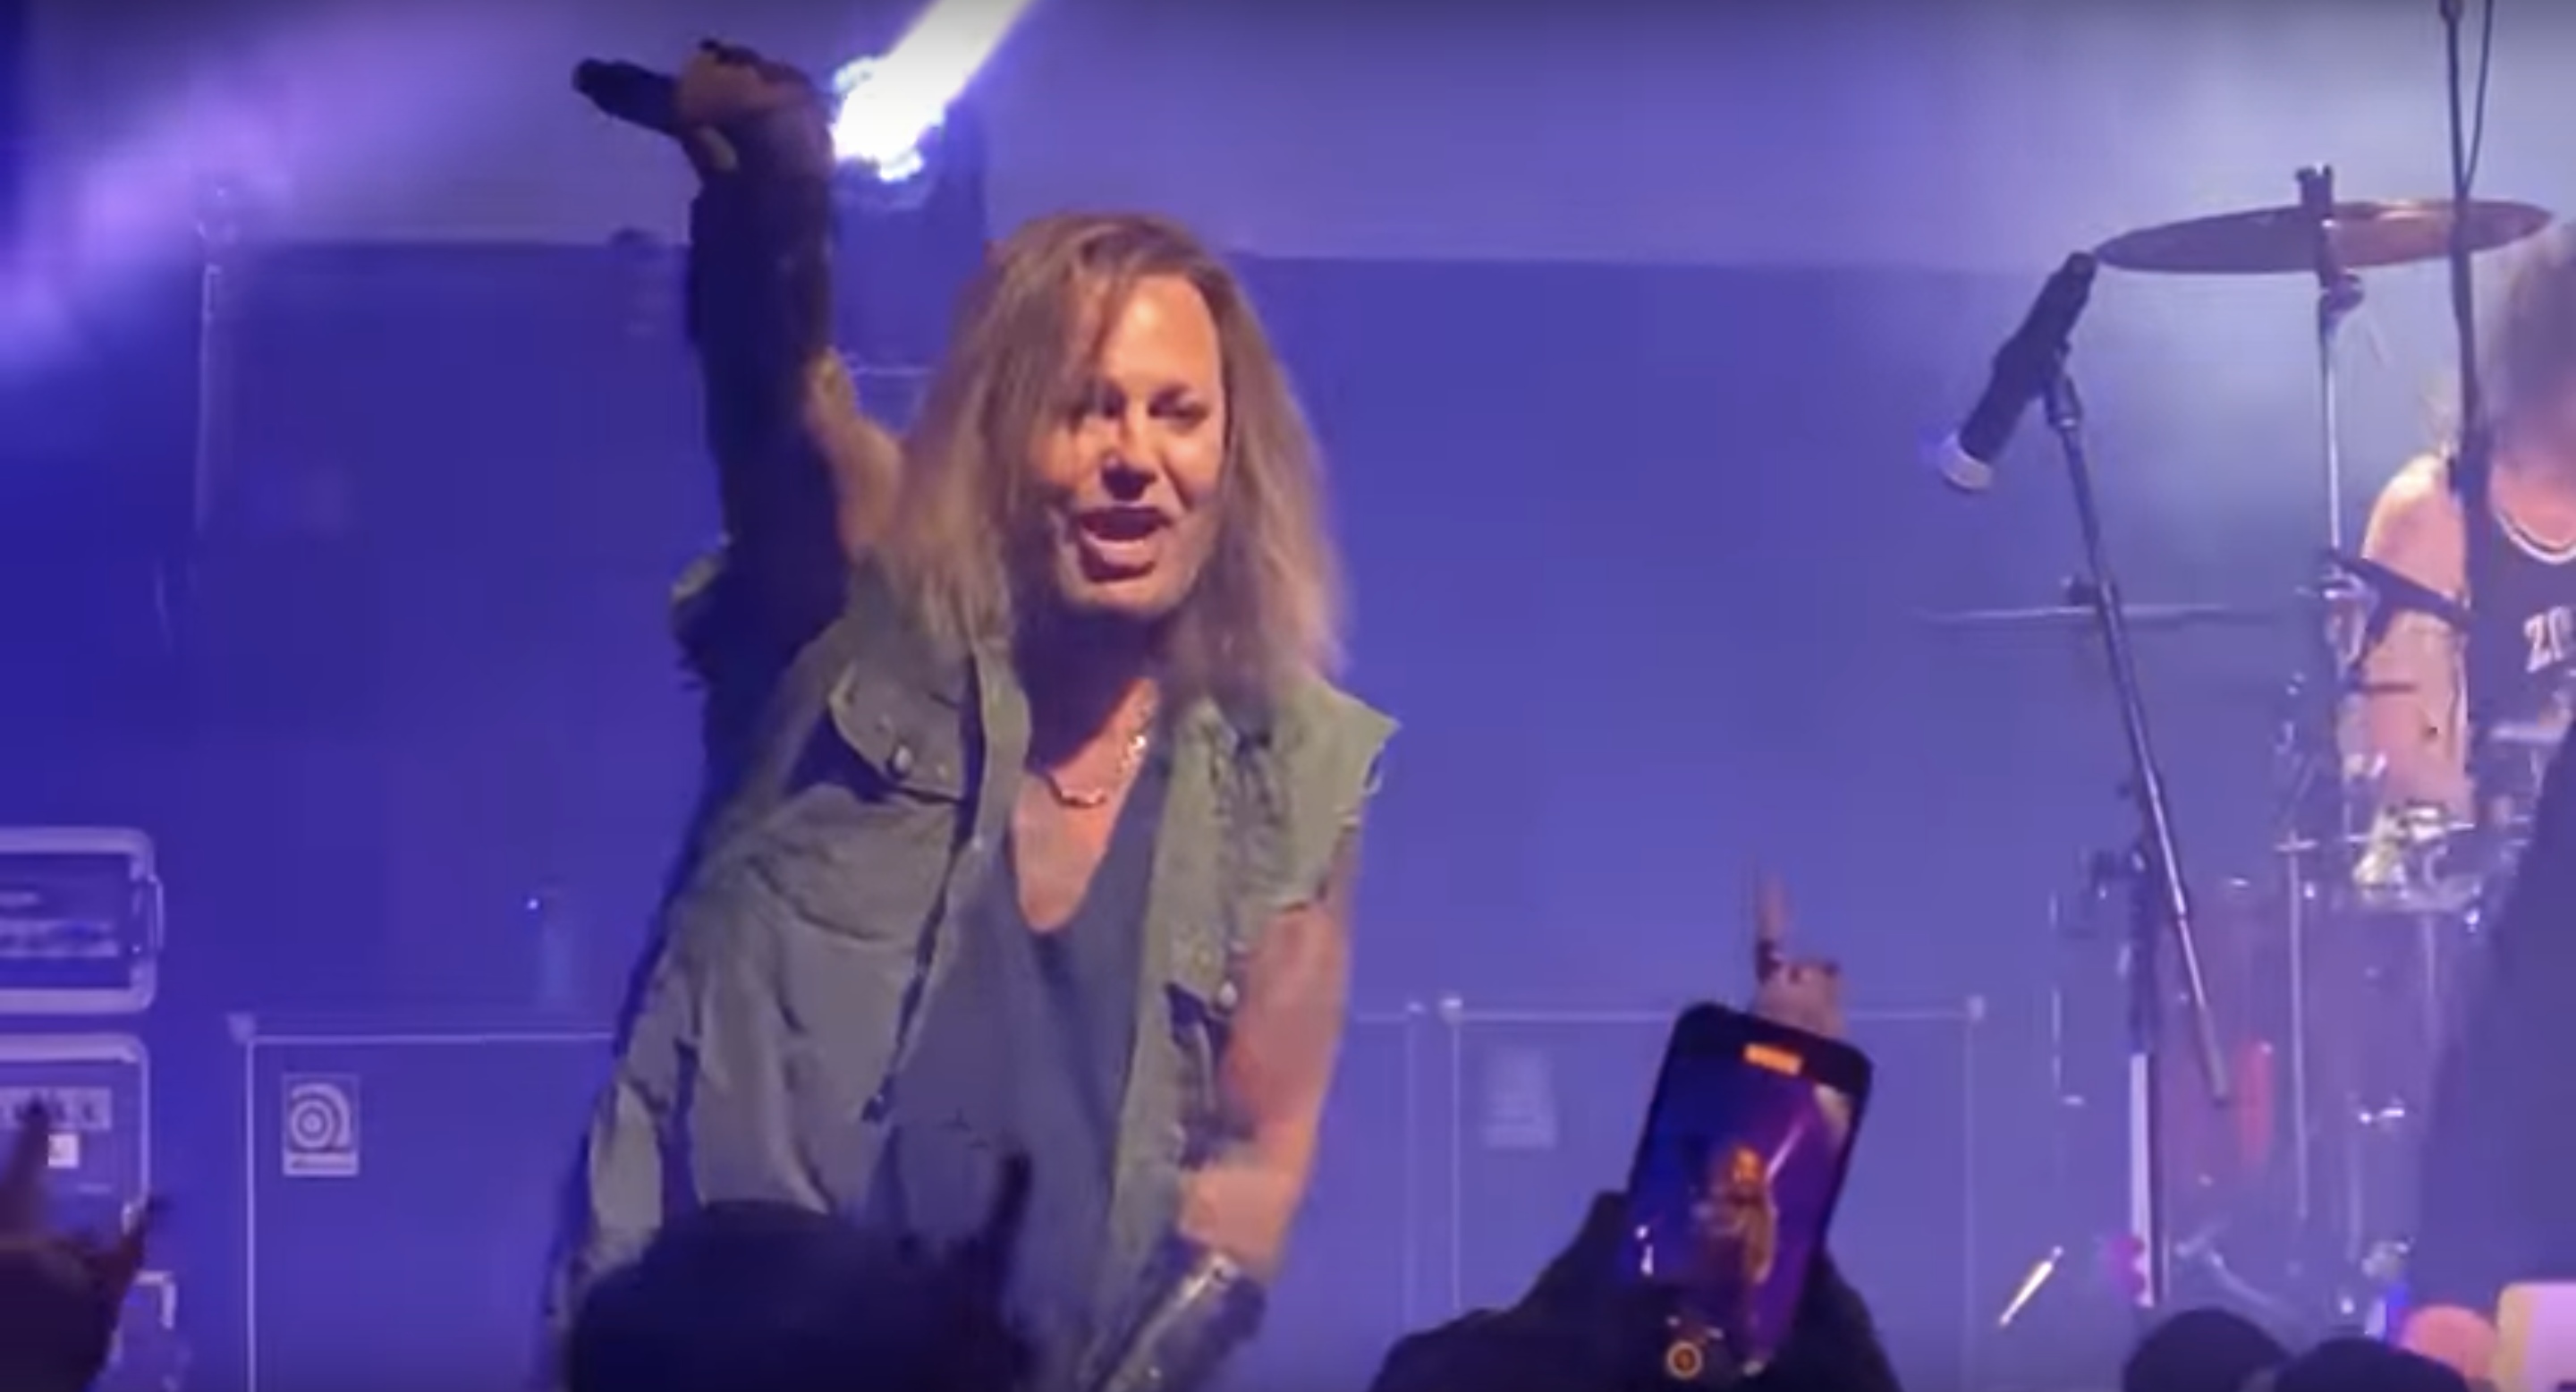 VINCE NEIL's First Performance Of 2022 Wasn't Great